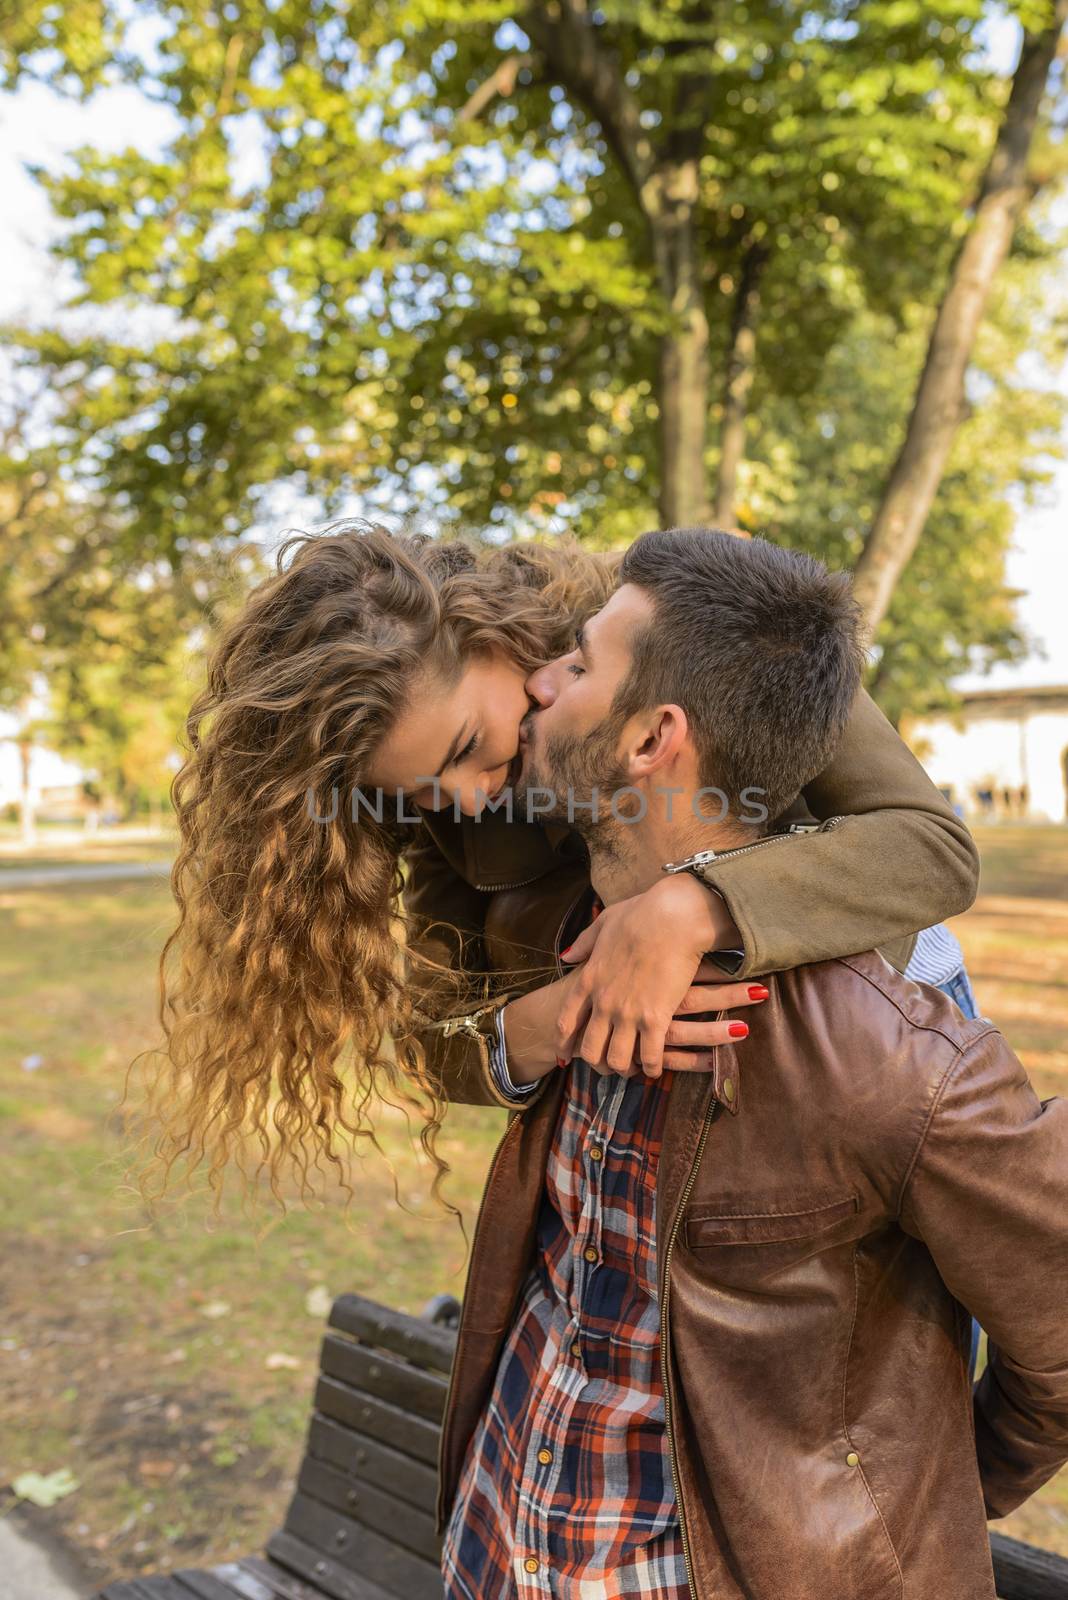 Attractive long haired girl is hugging his boyfriend while he is kissing her in the public park